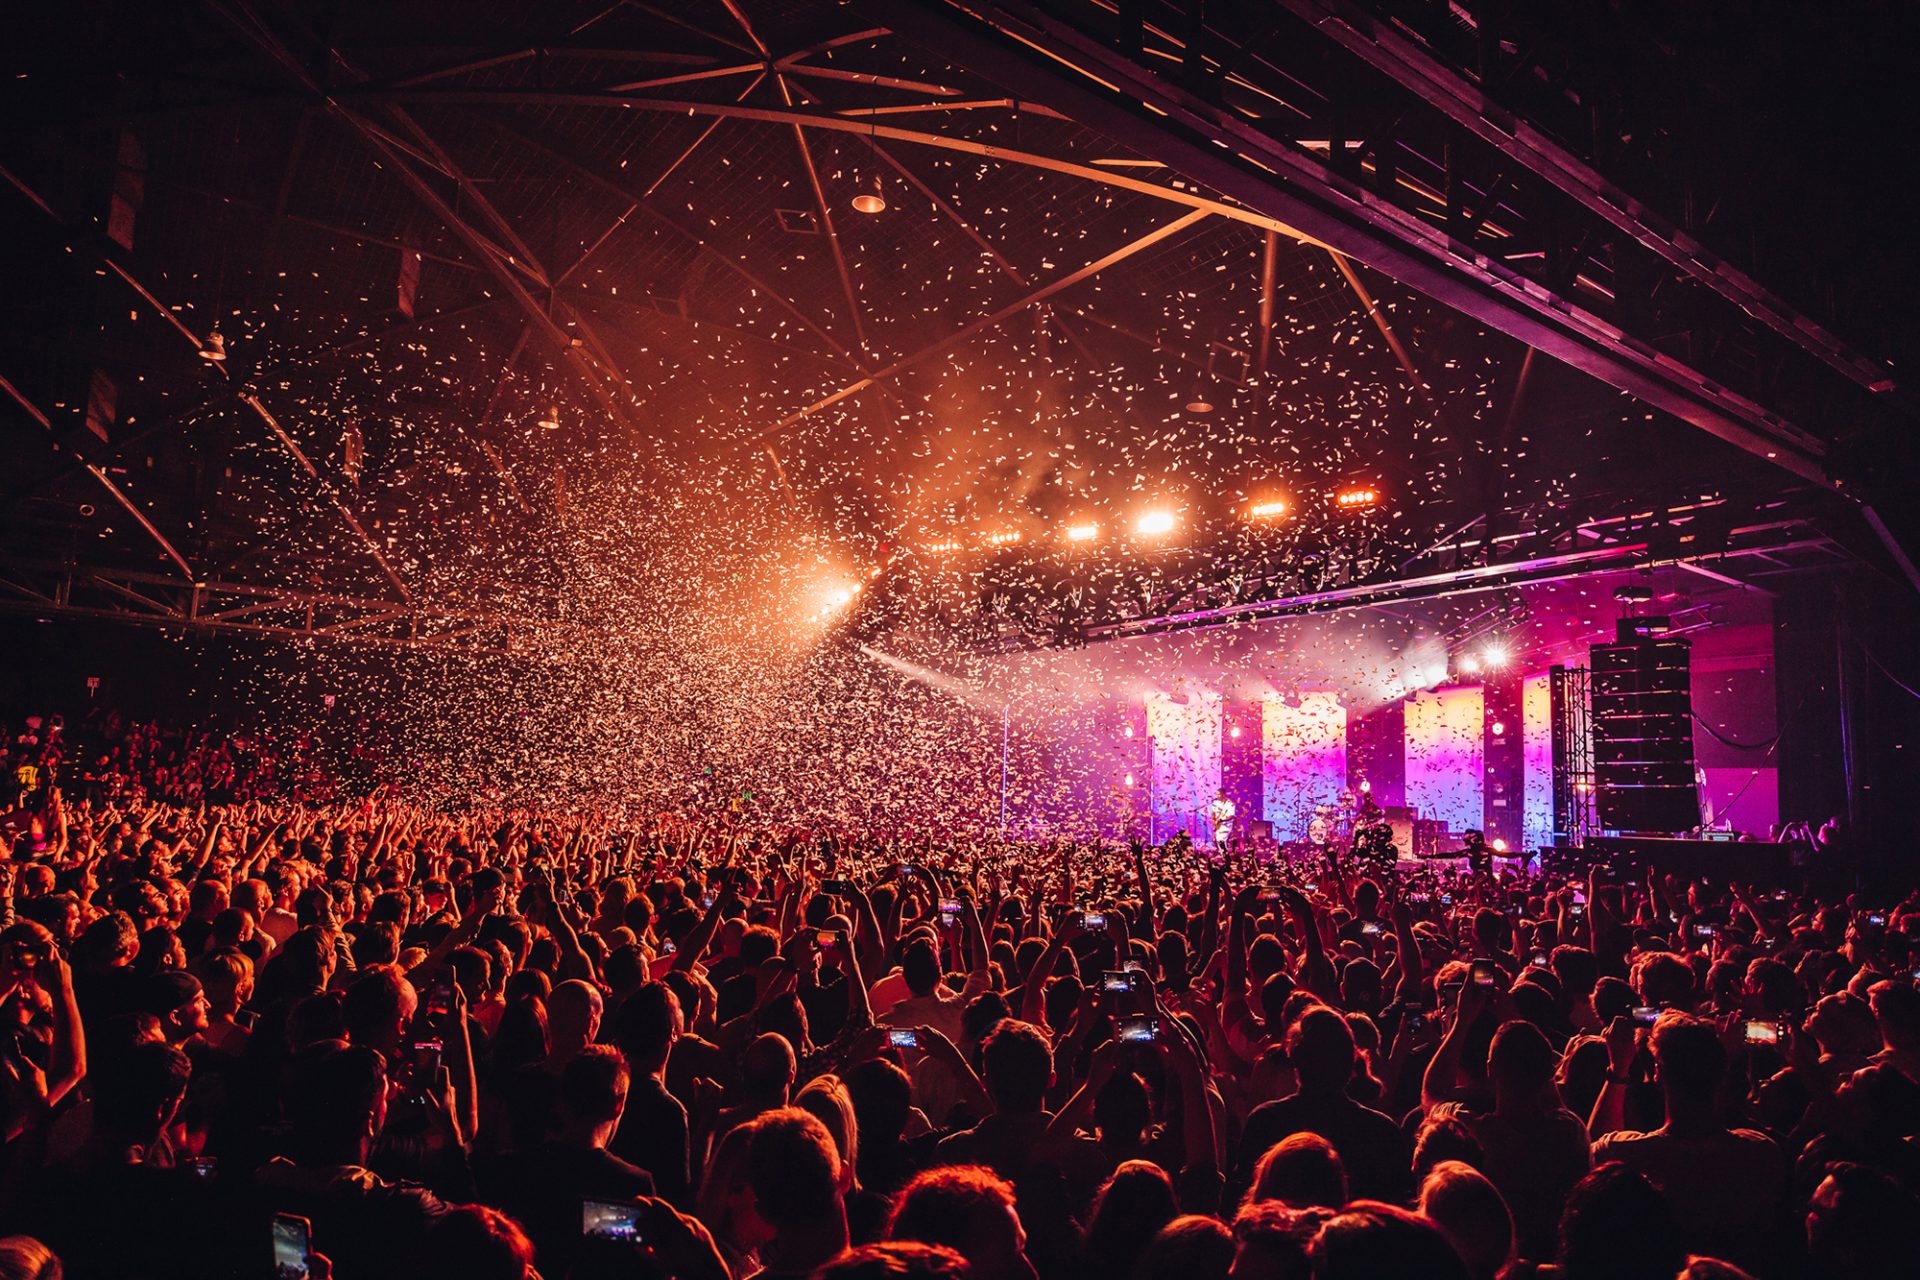 Back in business - Sydney’s Hordern Pavilion lifts the curtain on a new ...